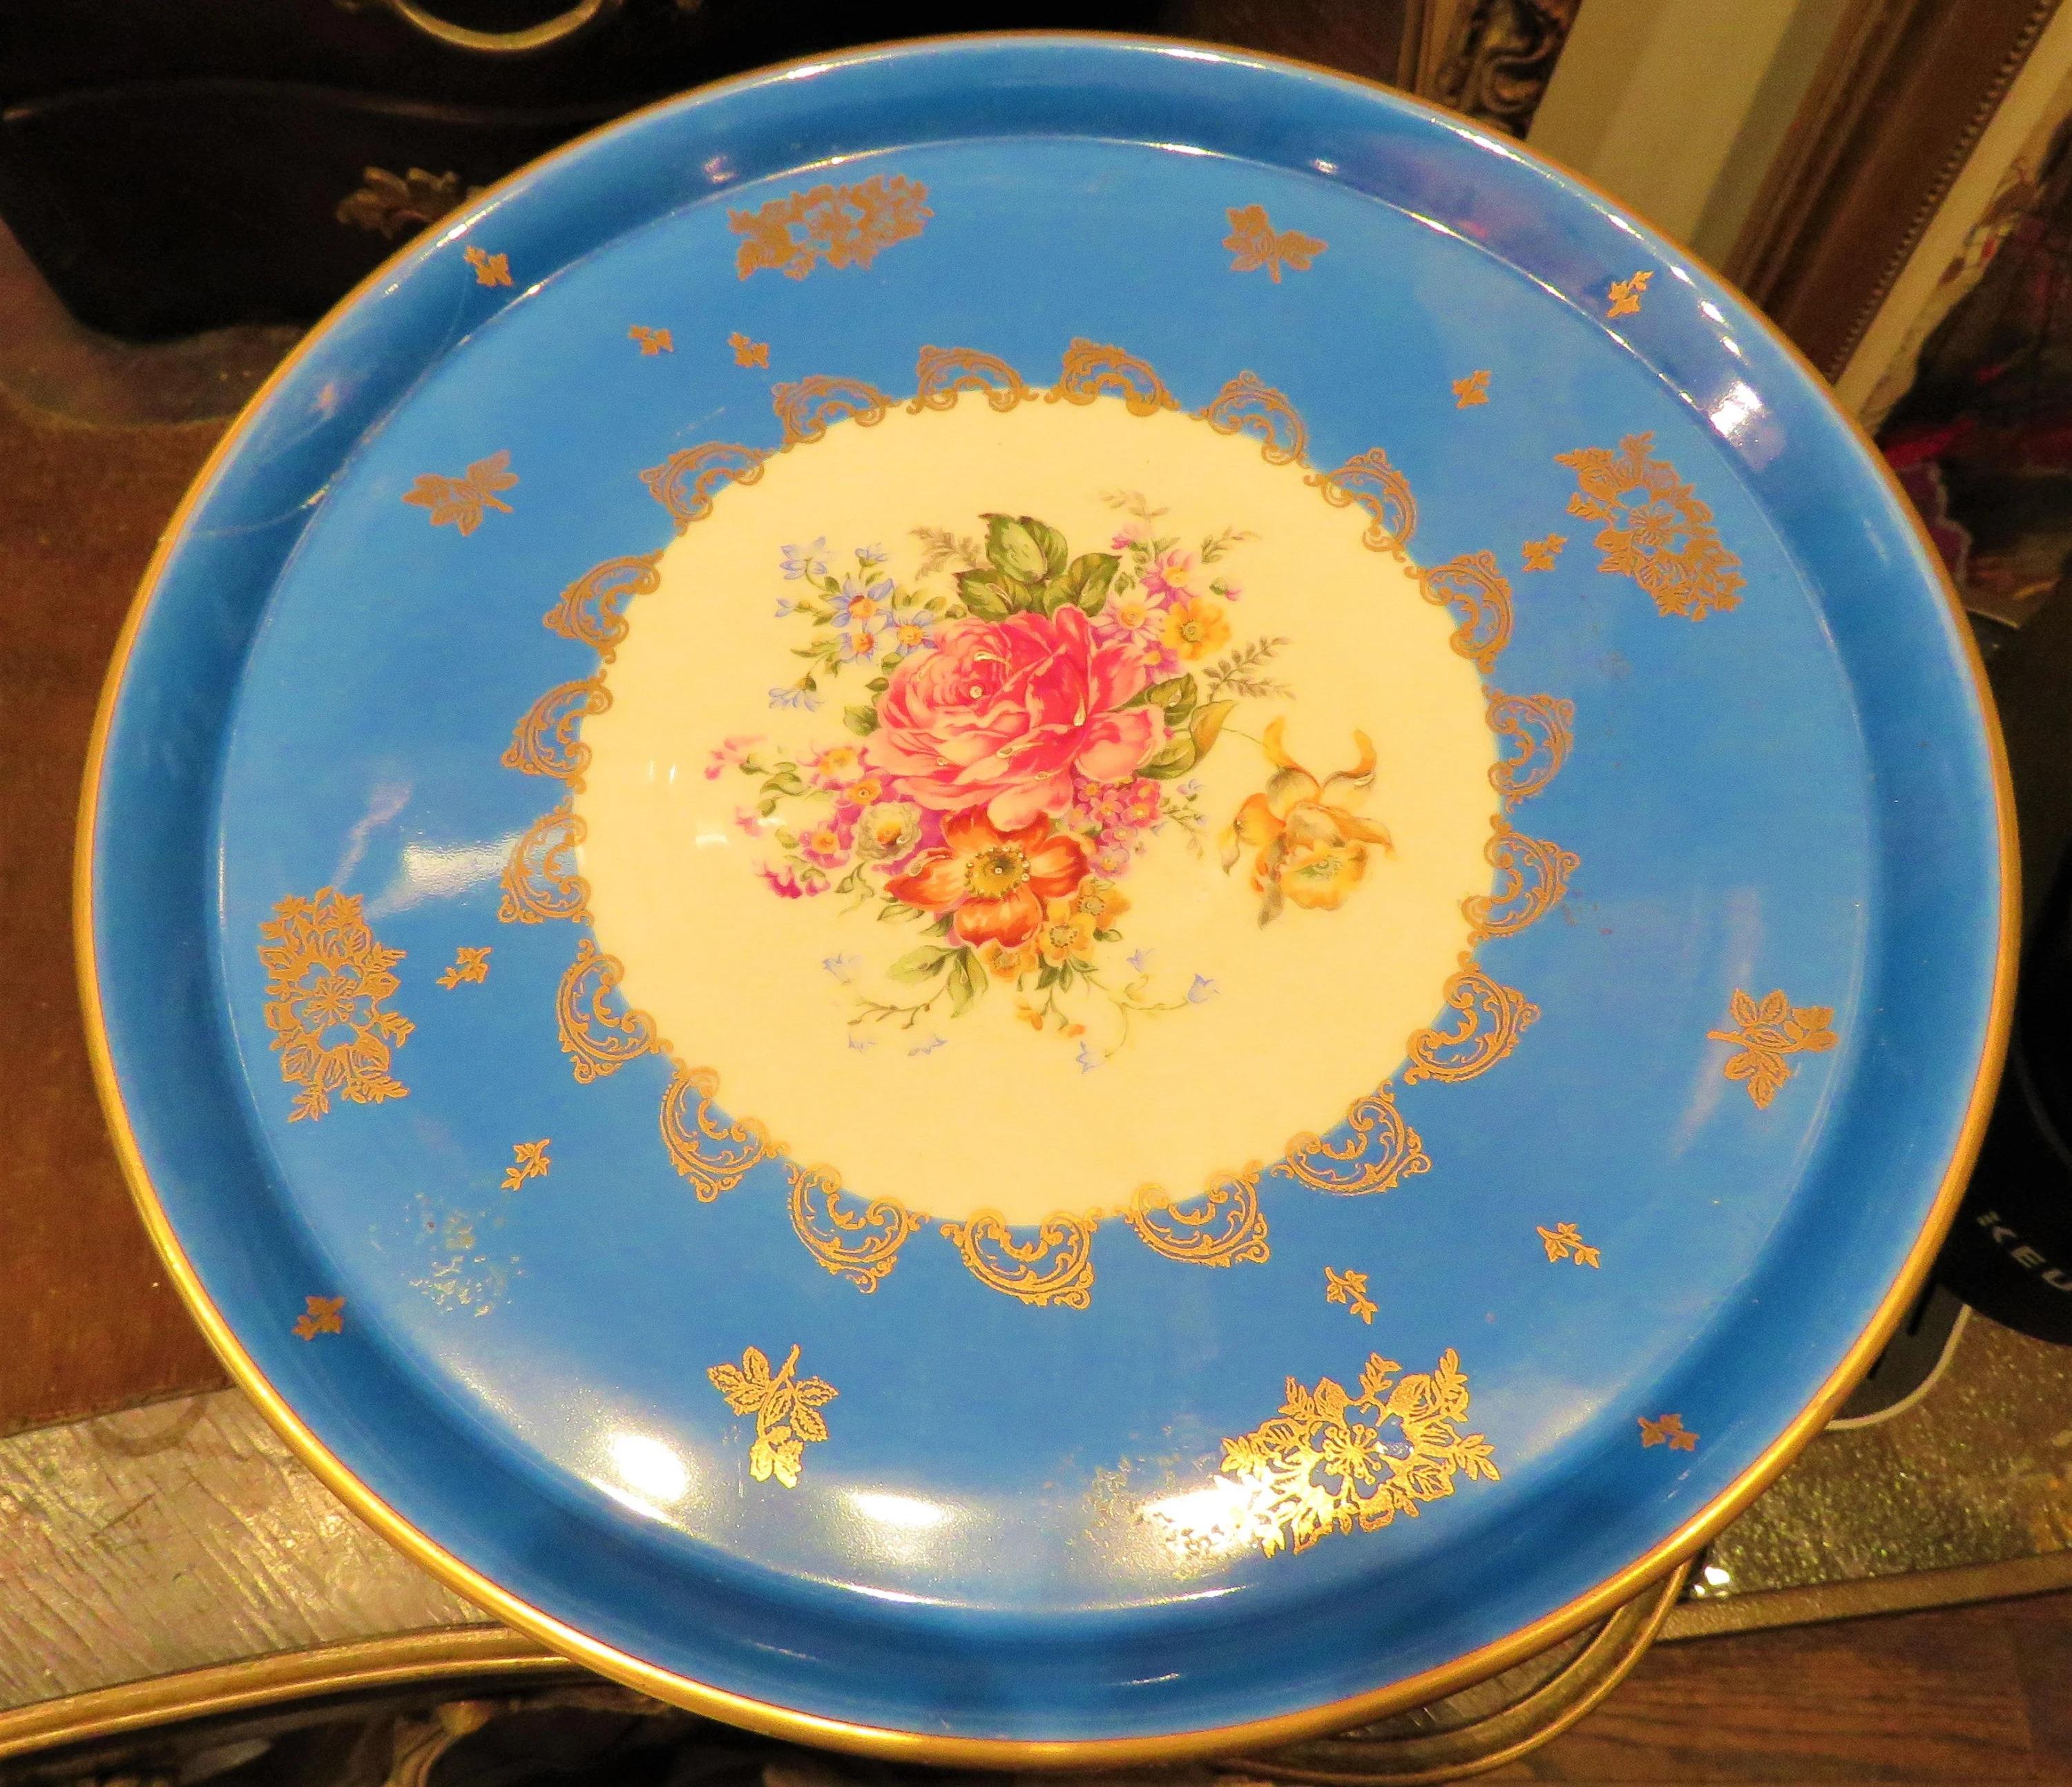 The Following Item that we are offering is A Rare and Impressive Magnificent and Exquisite Rare Large Handpainted Sevres Style Limoges Stamped Porcelain Cake Plate Server Centerpiece. Outstandingly done with Magnificent Drawings of Gold Floral